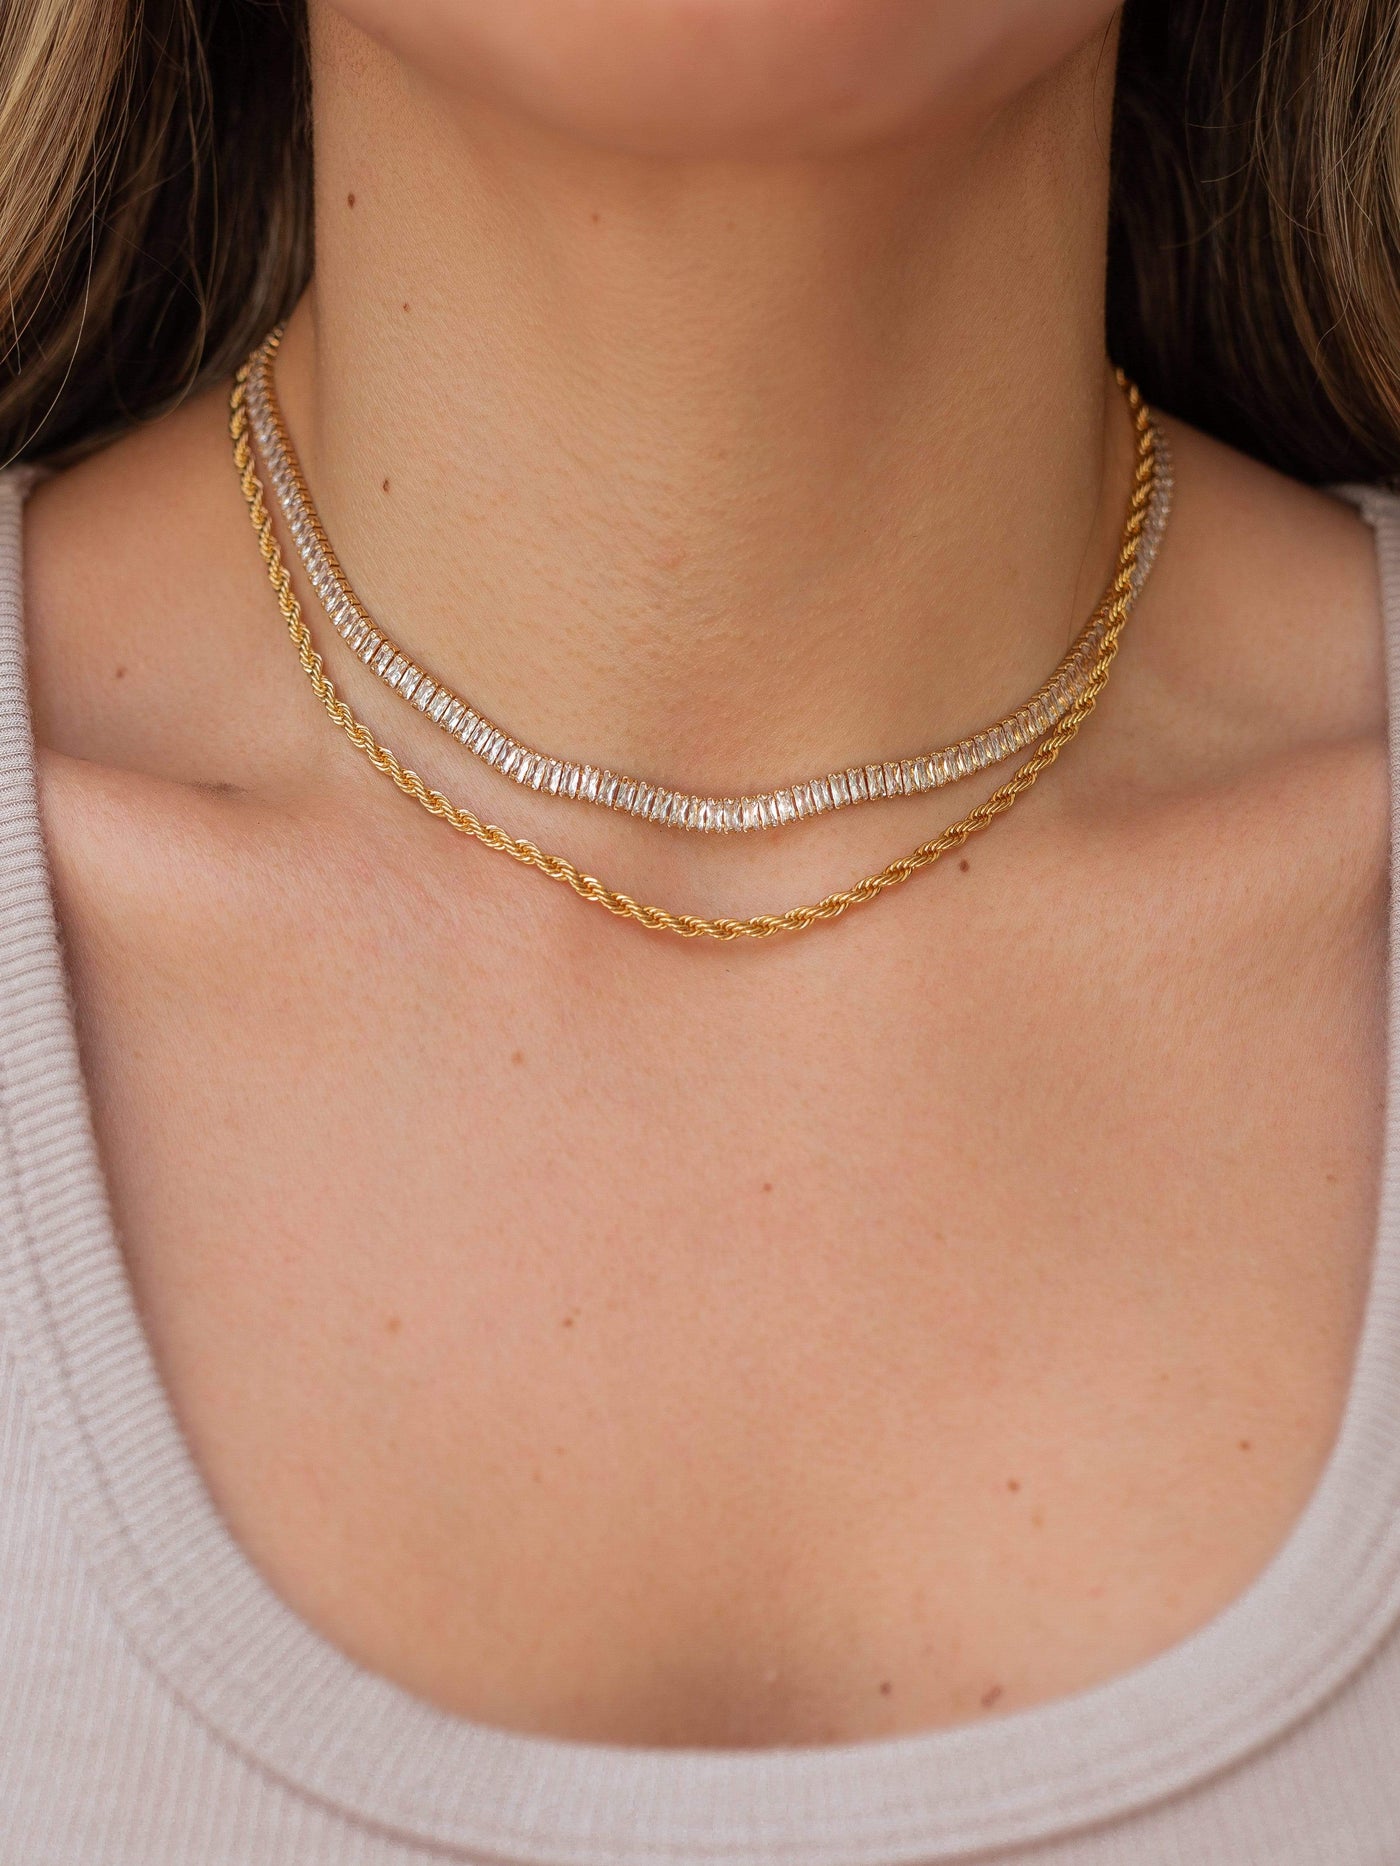 Zirconia Tennis Diamond Necklace in Yellow 18k Brazilian Gold Layered with a Gold Rope Chain Necklace